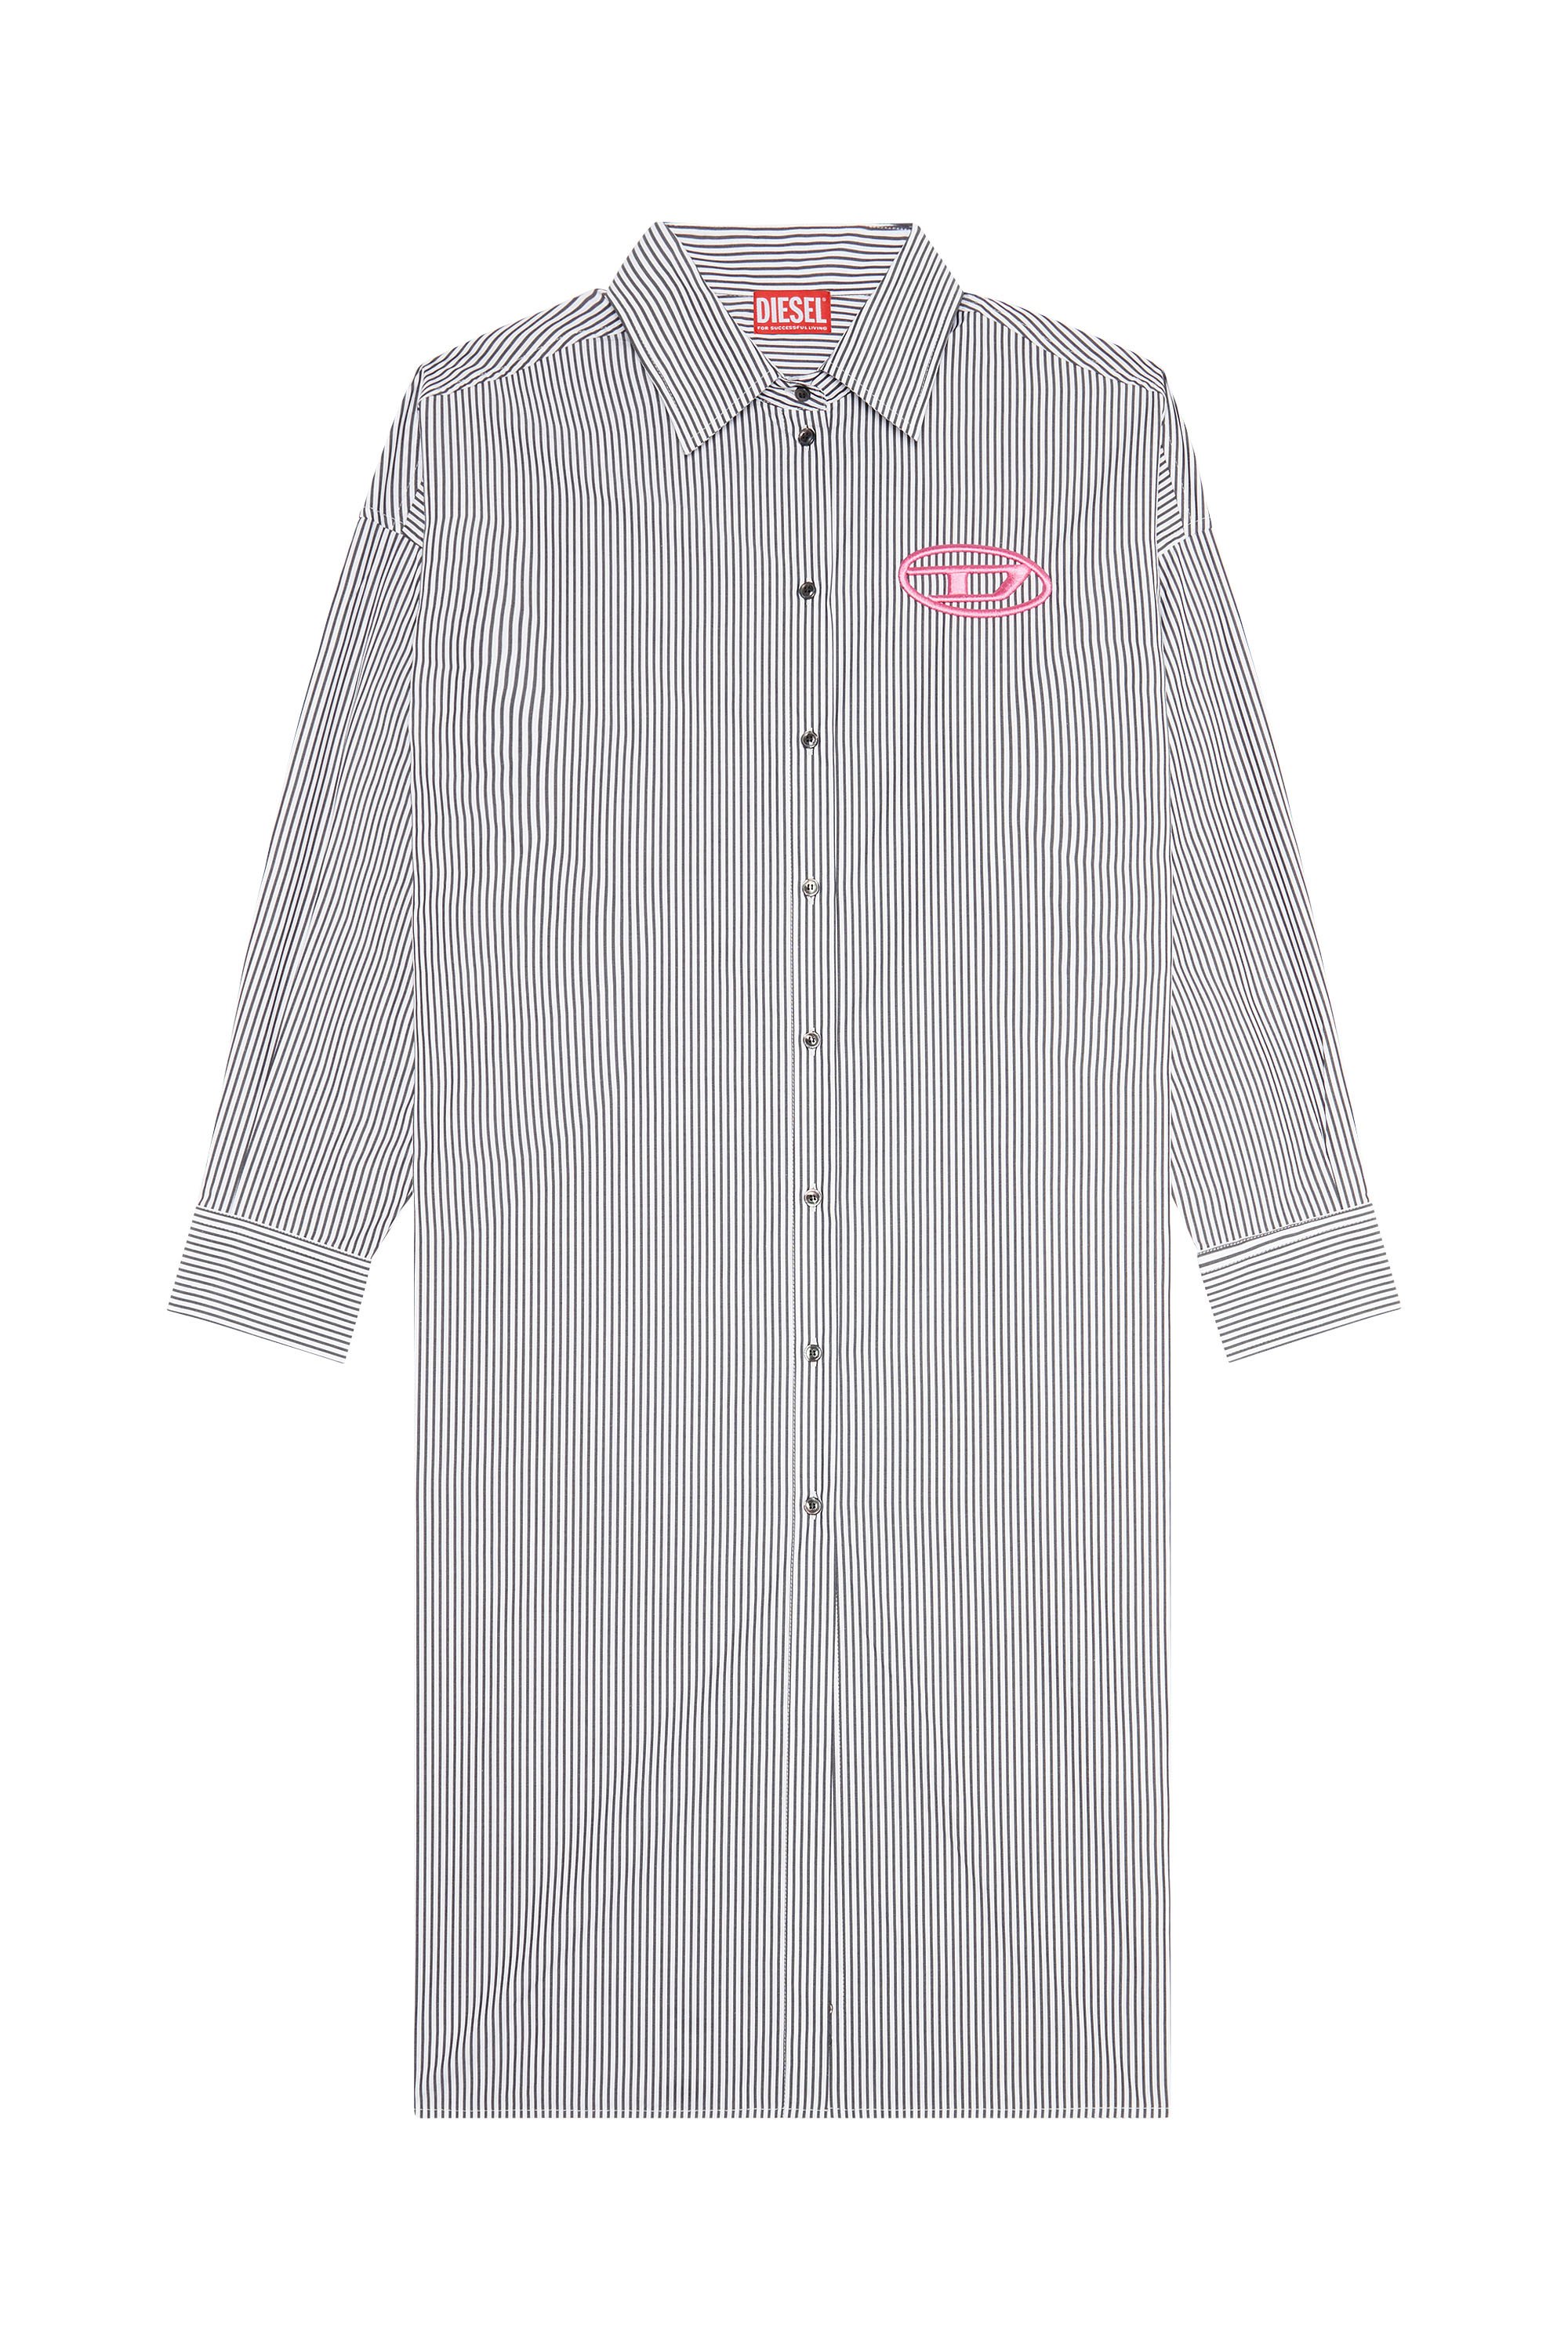 Diesel - D-LUN-STRIPE, Woman Striped shirt dress with logo embroidery in Multicolor - Image 3